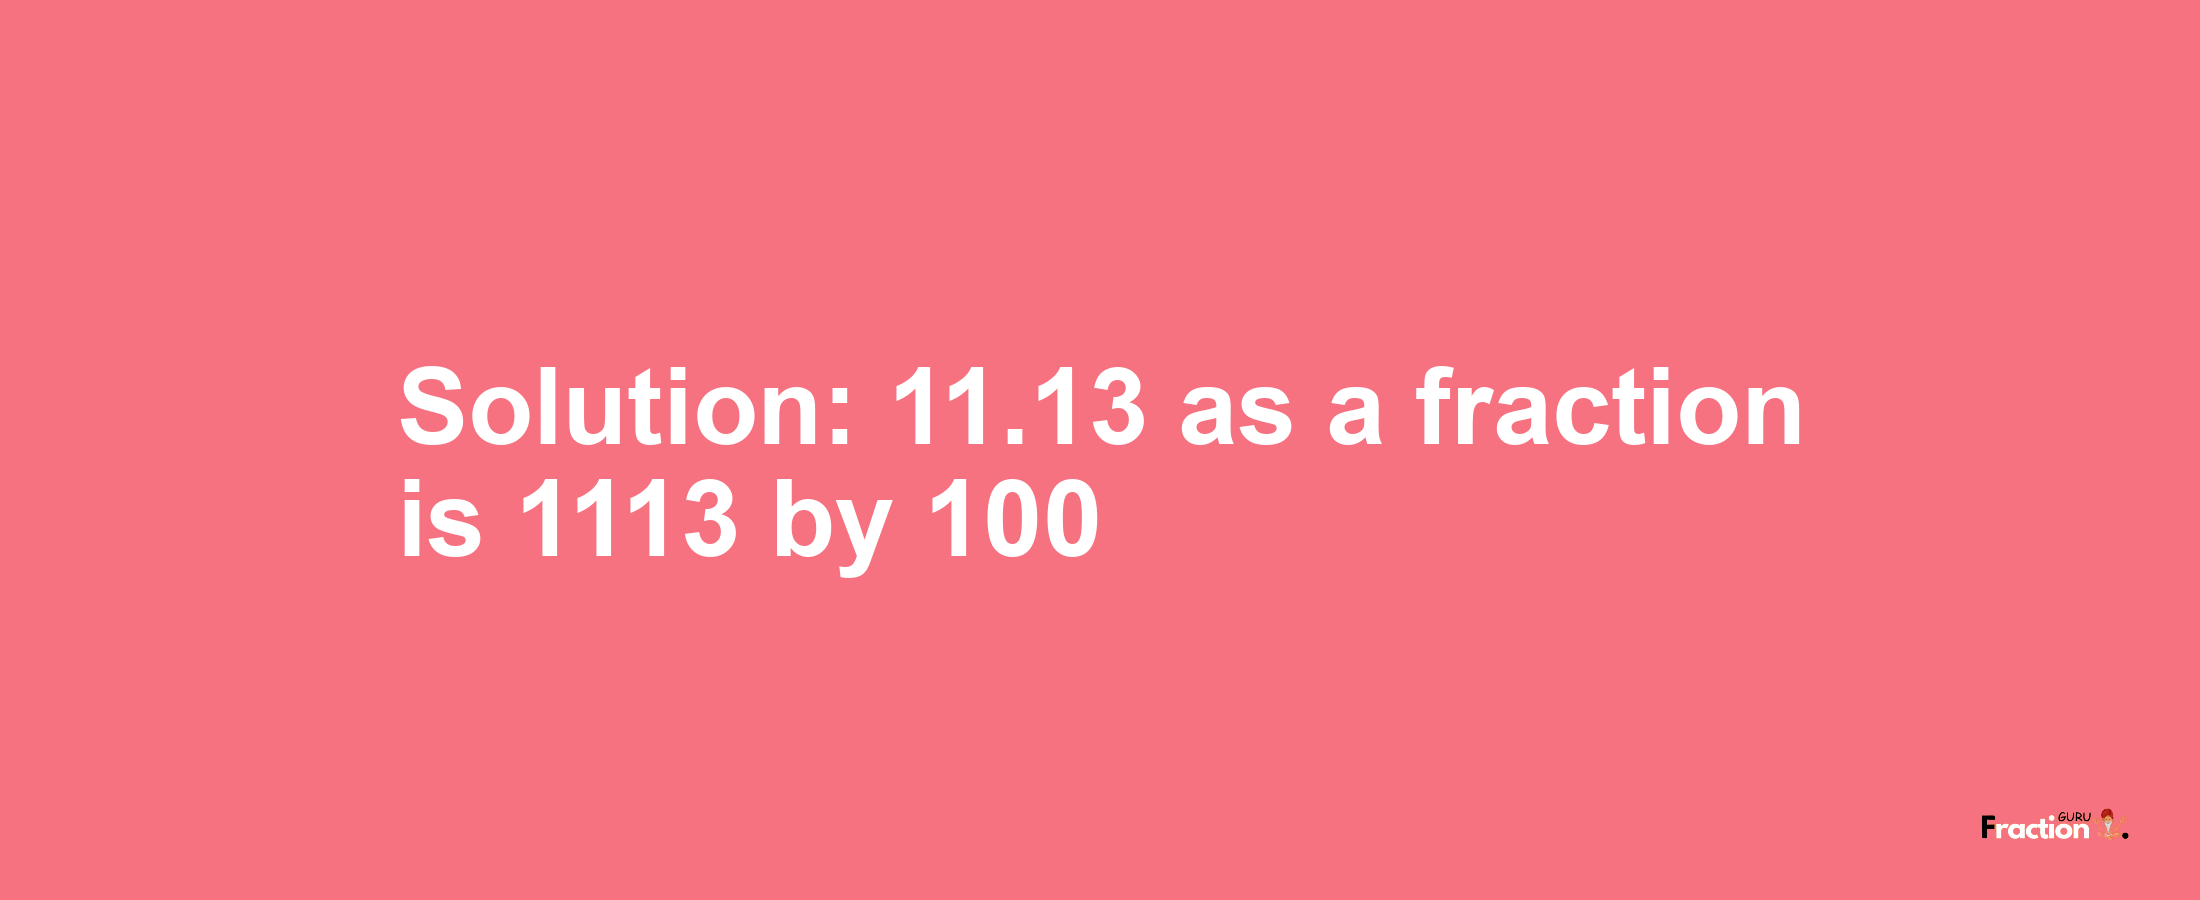 Solution:11.13 as a fraction is 1113/100